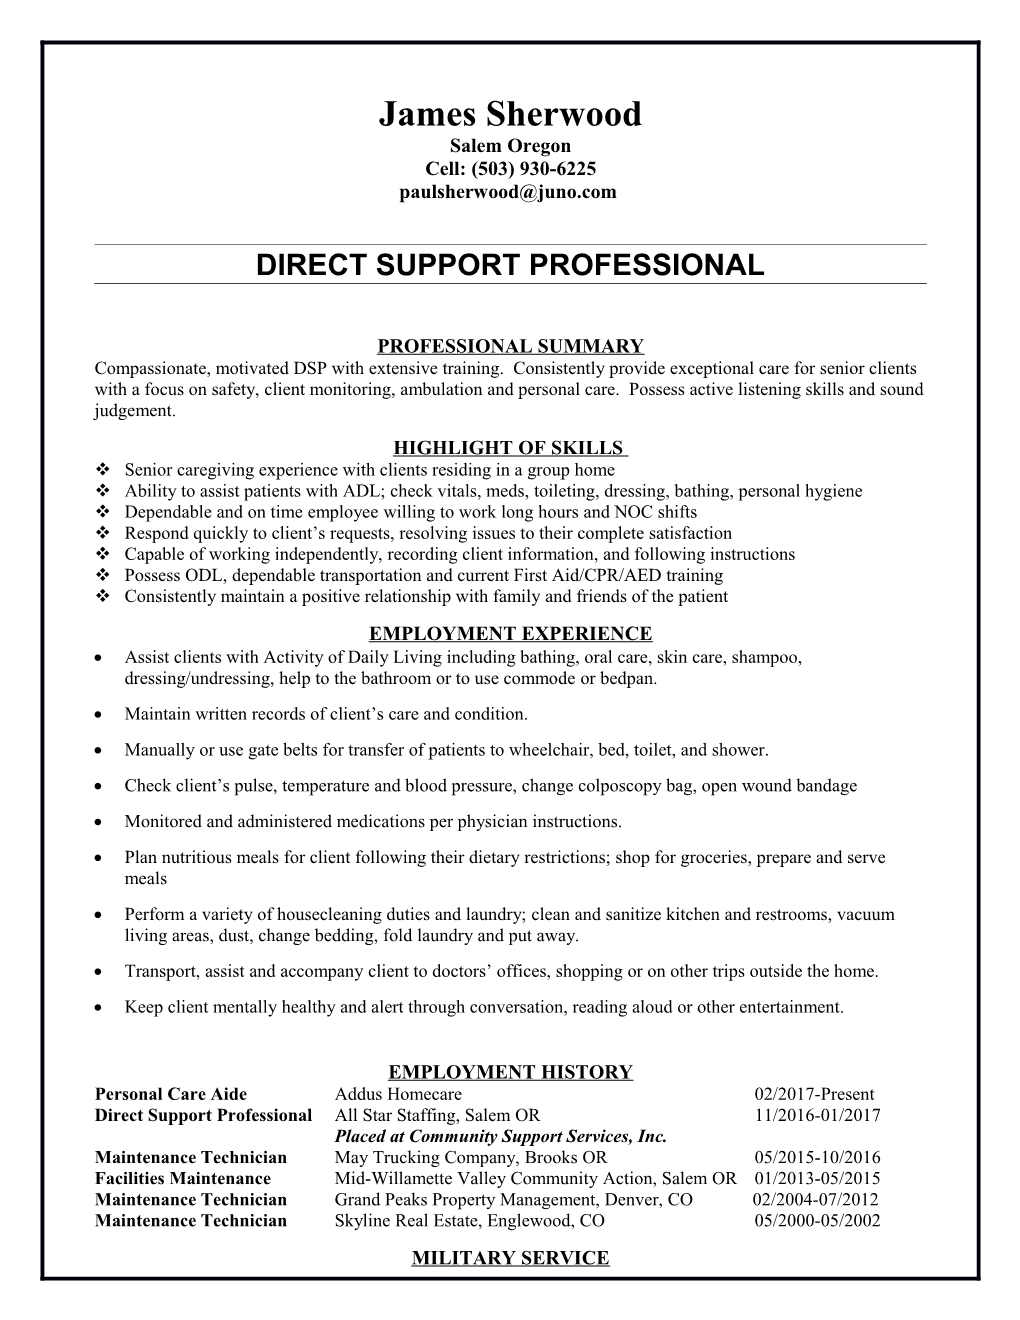 Direct Support Professional